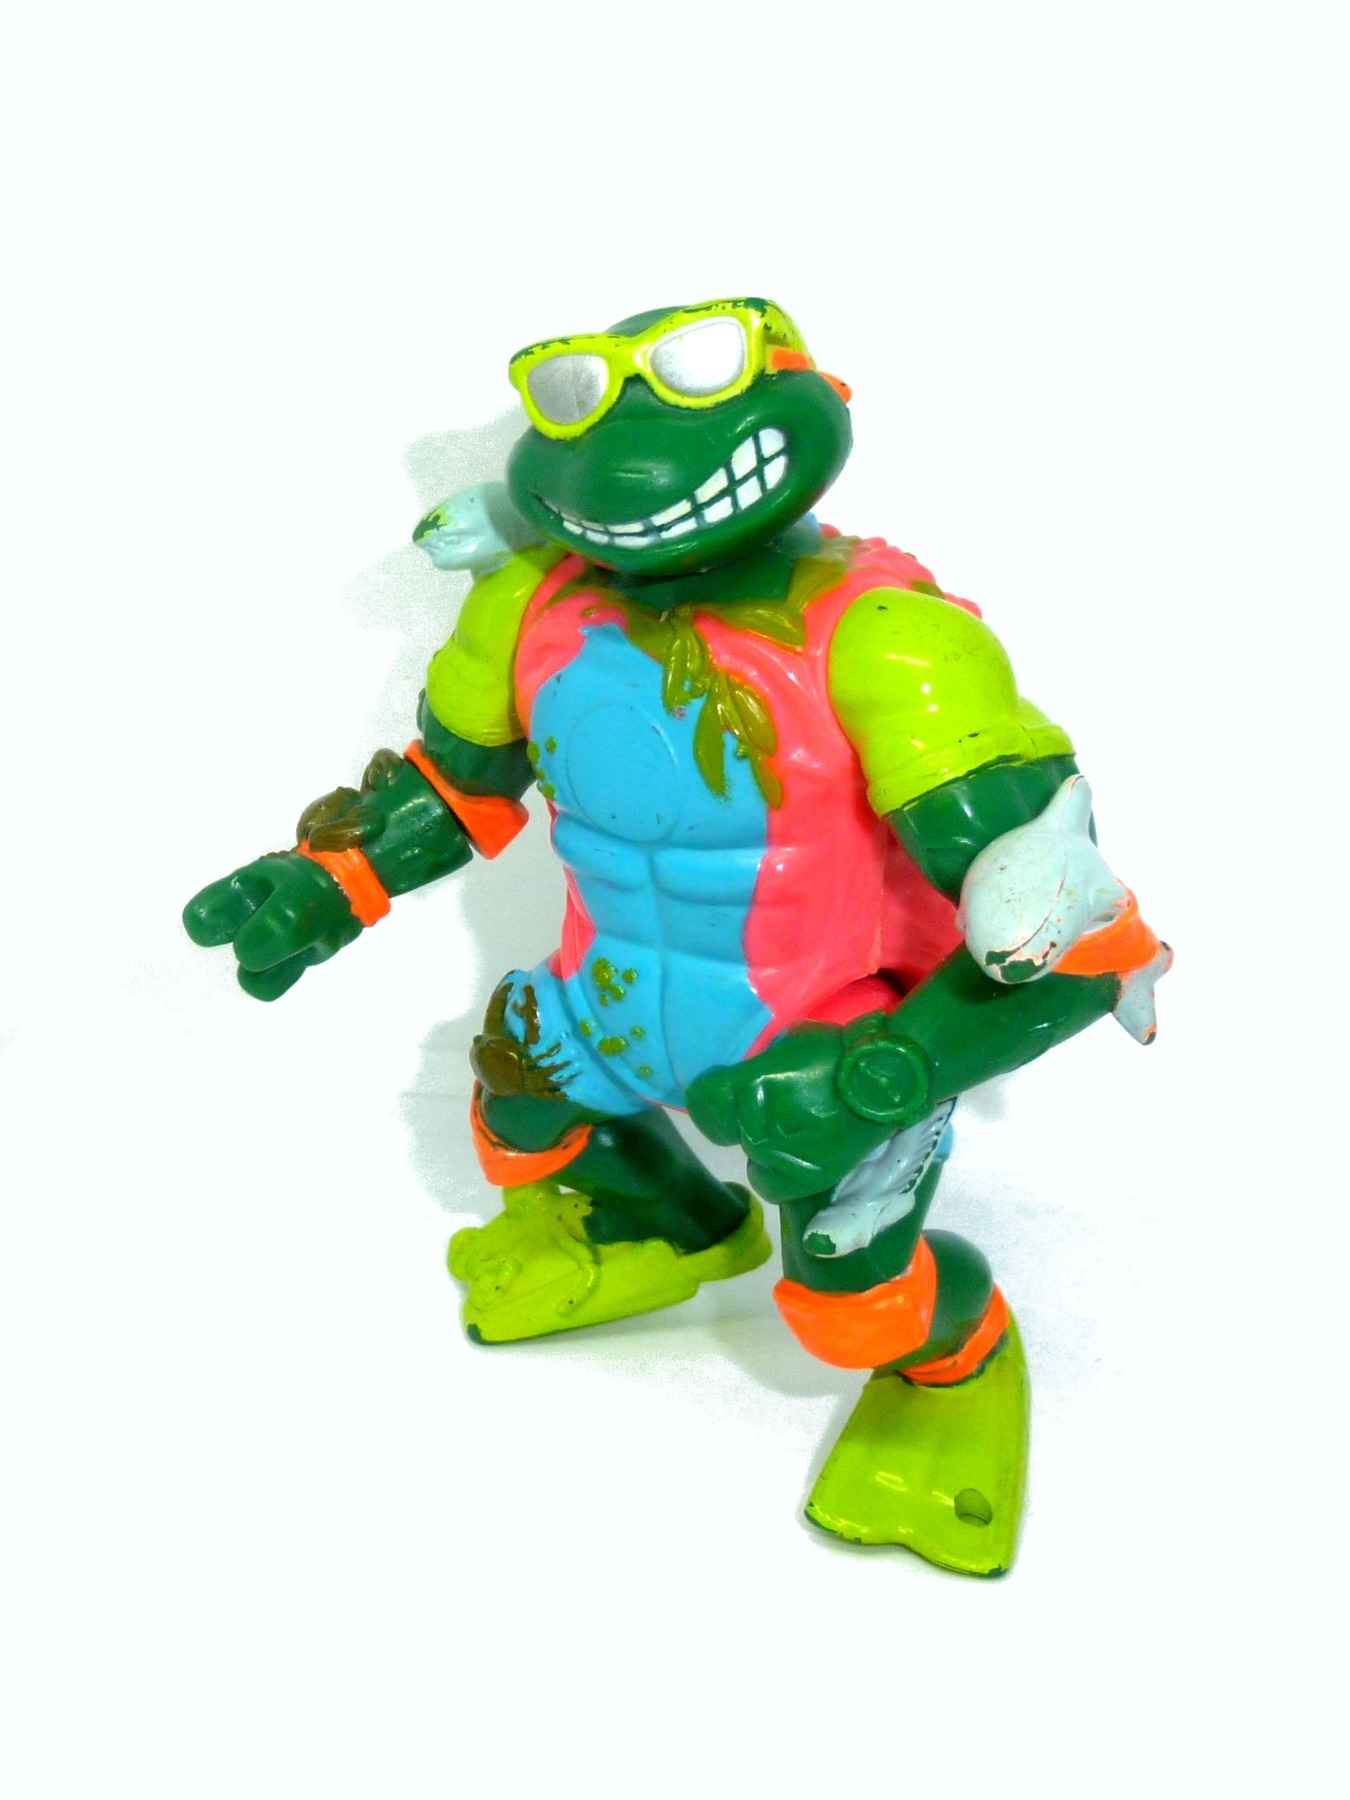 Mike the Sewer Surfer - Michelangelo 1990 Mirage Studios / Playmates Toys 3